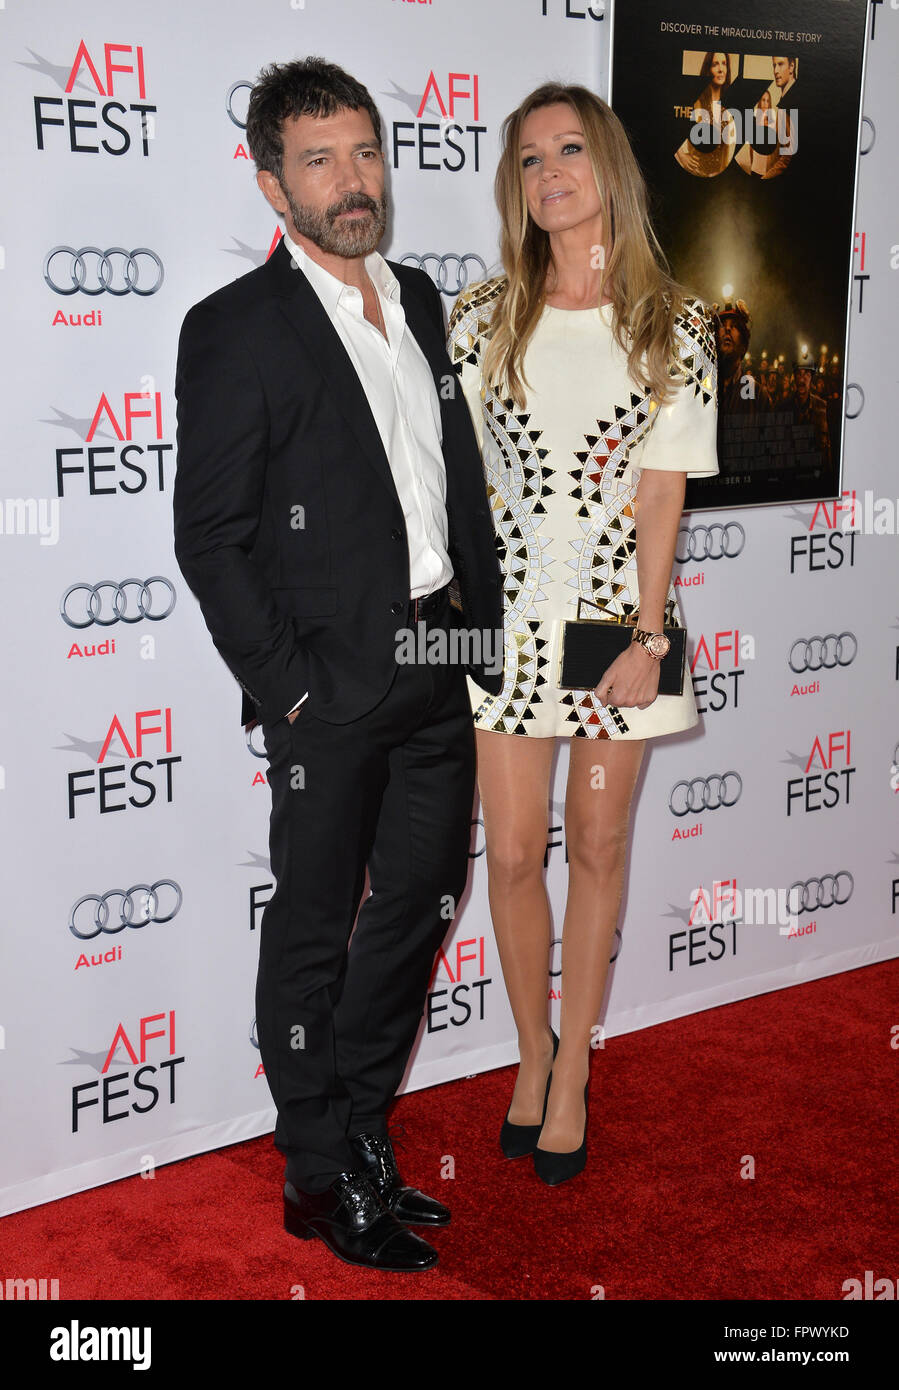 LOS ANGELES, CA - NOVEMBER 9, 2015: Actor Antonio Banderas & girlfriend Nicole Kimpel at the premiere of his movie 'The 33', part of the AFI FEST 2015, at the TCL Chinese Theatre, Hollywood. Stock Photo